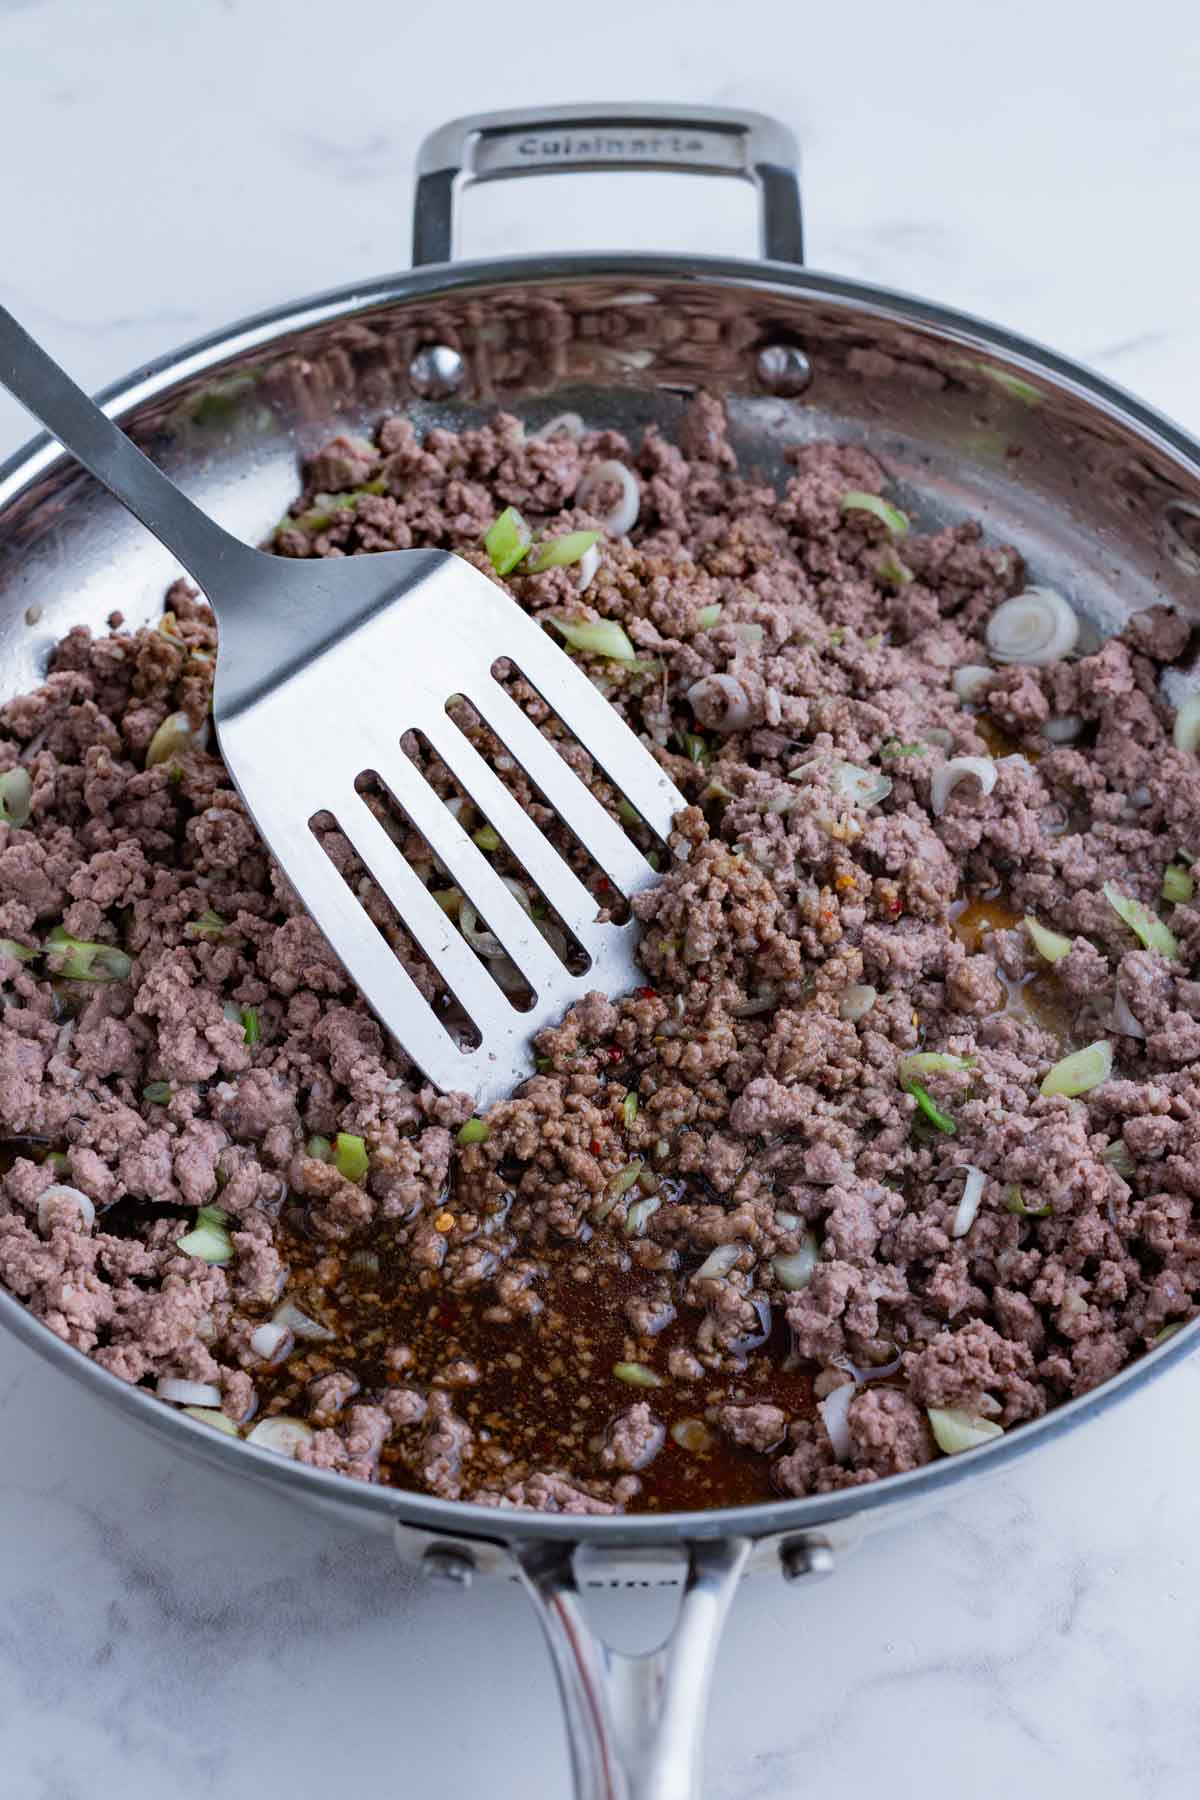 The sauce ingredients are added to the beef mixture.